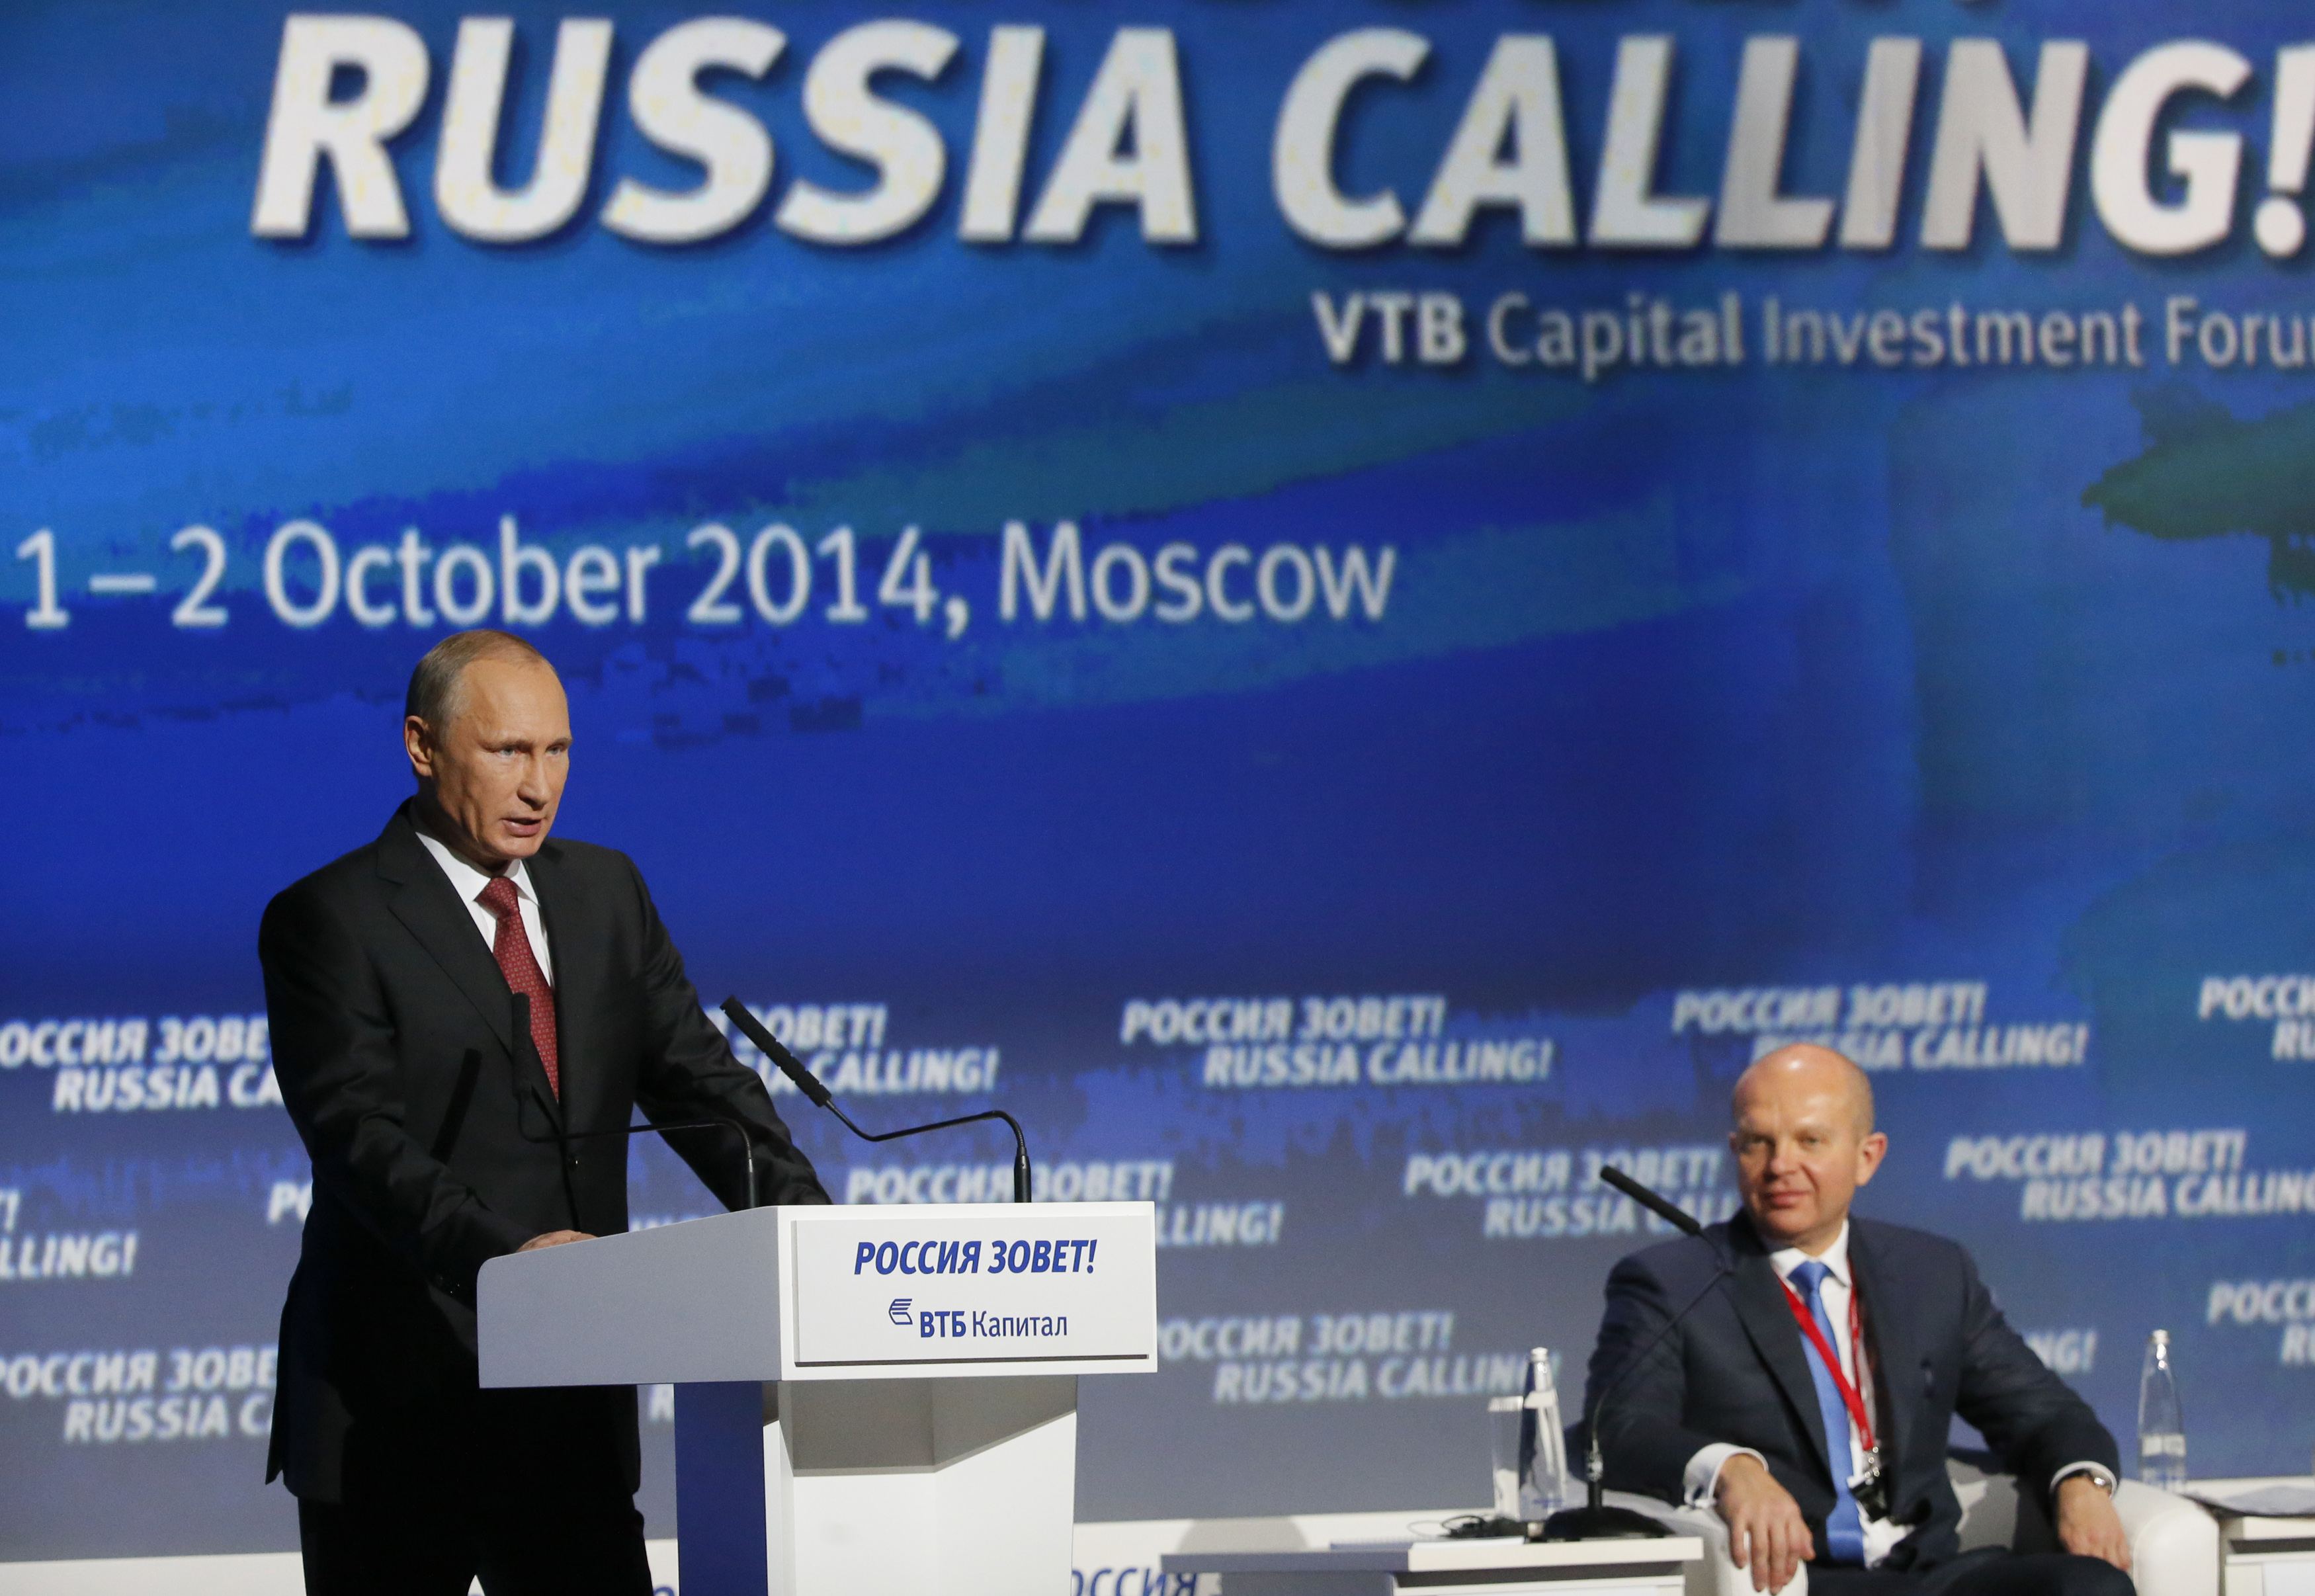 Russia's president, Vladimir Putin, addresses the VTB Capital forum in Moscow. (Photo: Reuters)